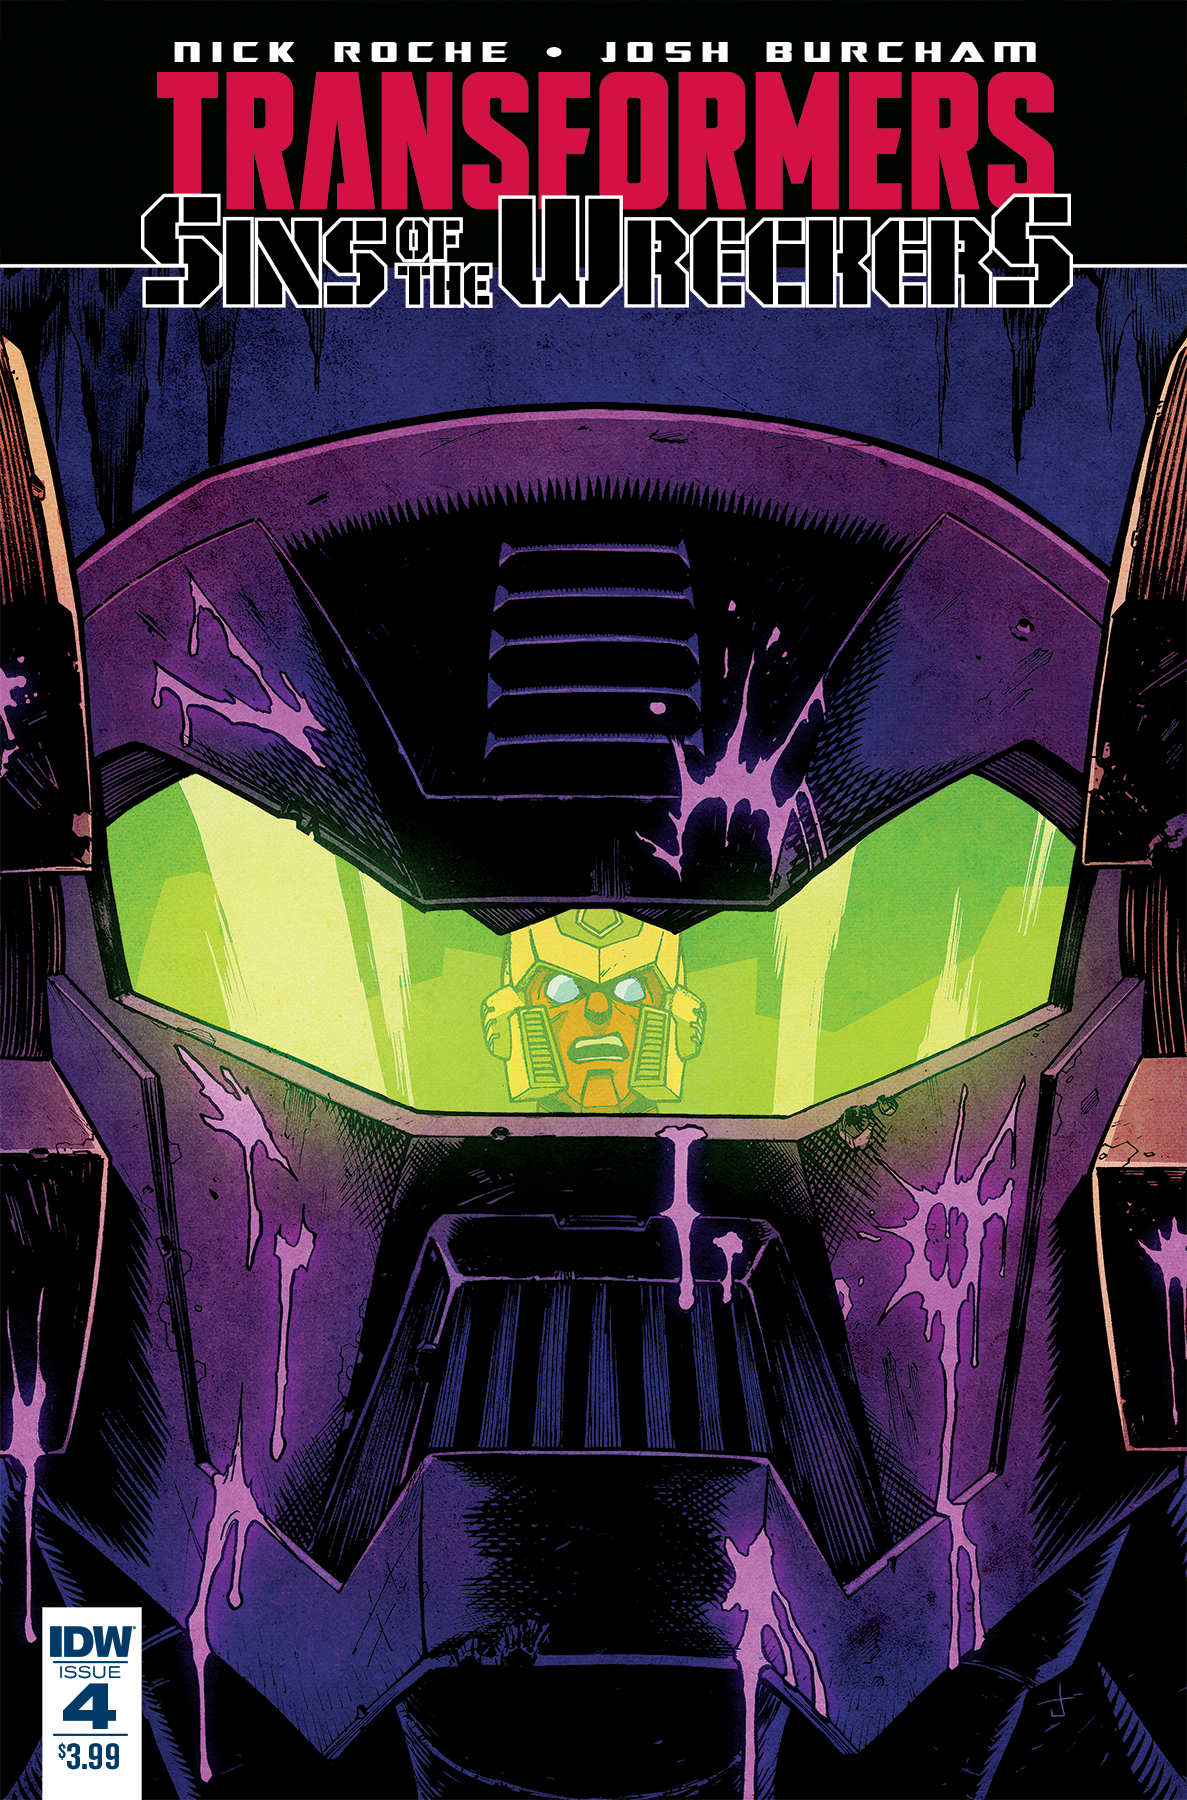 Transformers: Sins of the Wreckers #4 (of 5)